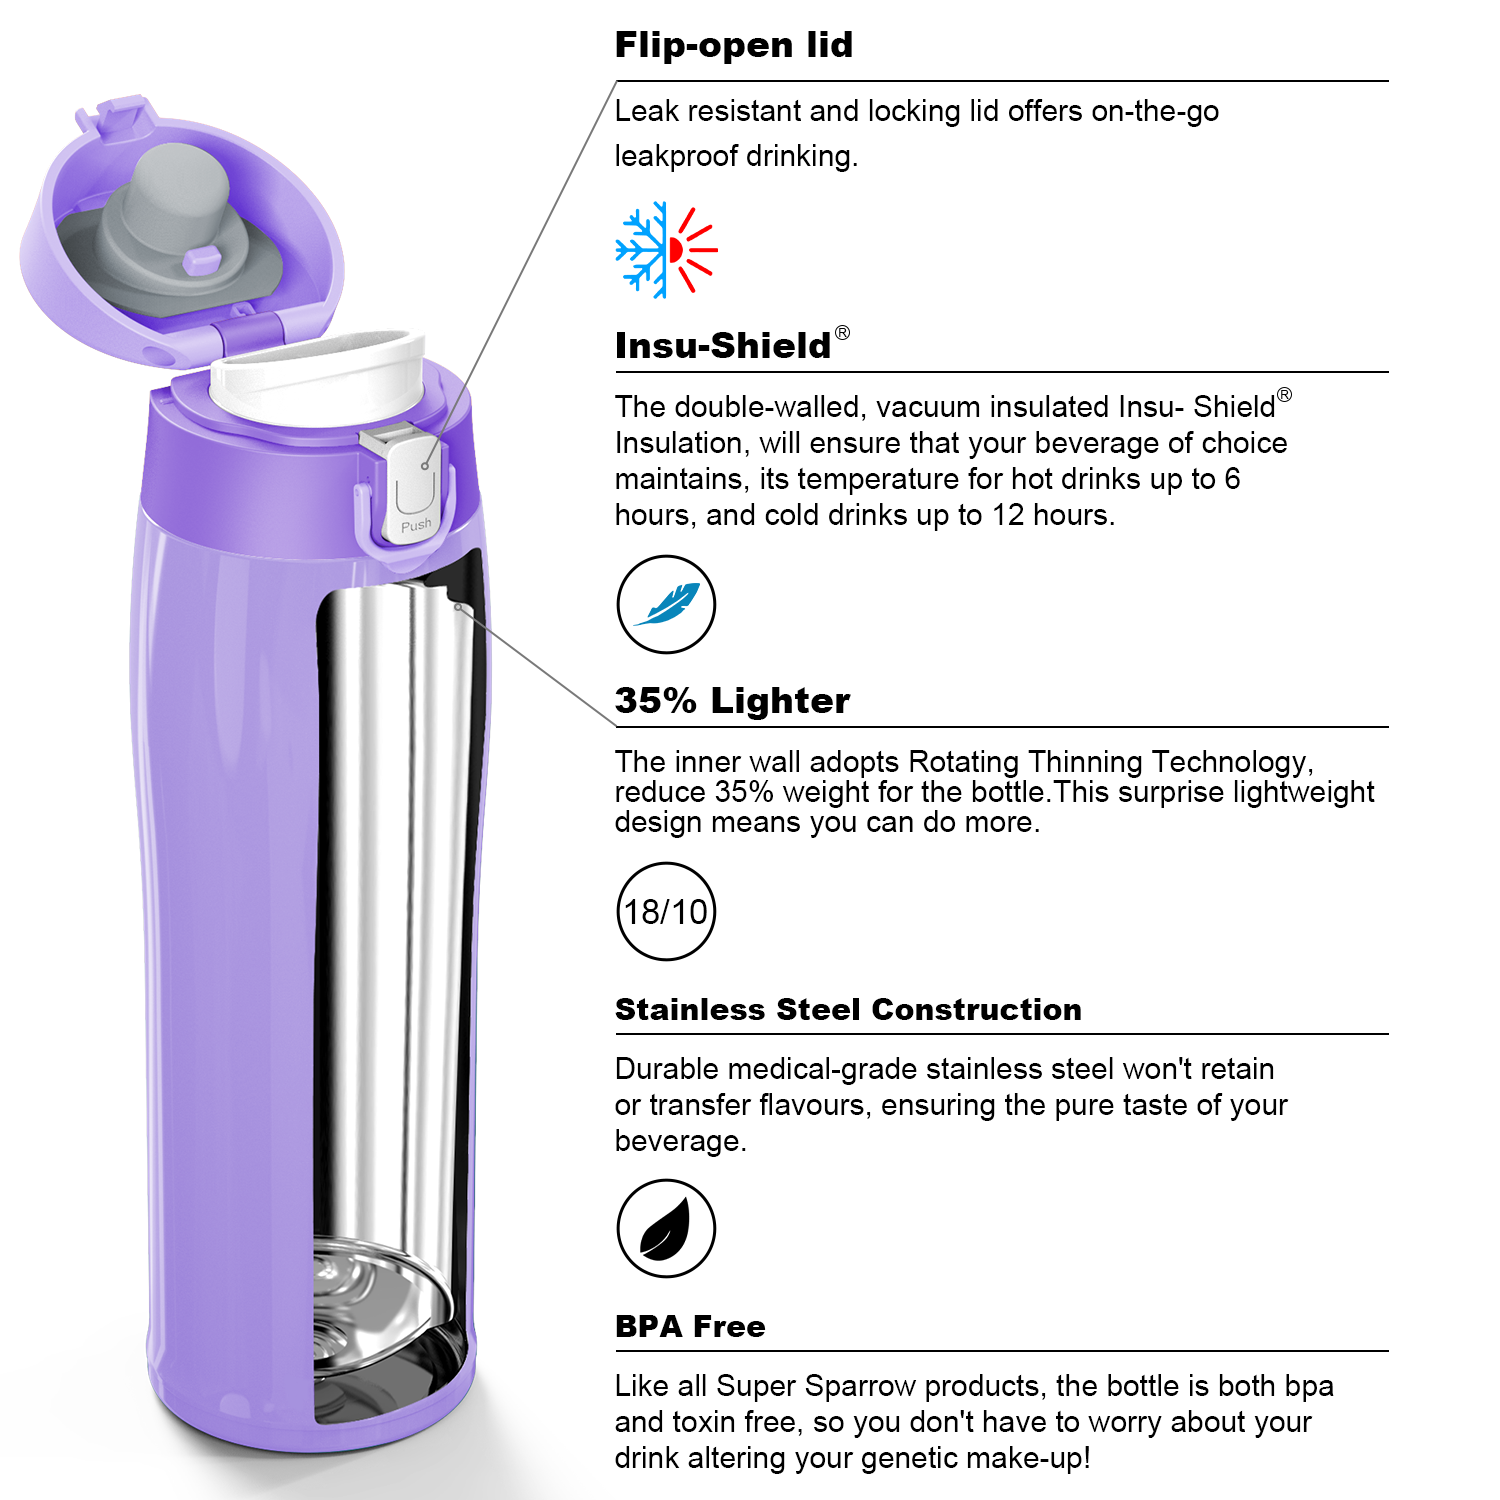  Super Sparrow Water Bottle Stainless Steel 18/10 - Ultralight  Metal Water Bottle - 500ml - Insulated Water Bottles - Water Bottle with  Straw Lid - Flask for Gym, Travel, Sports : Sports & Outdoors